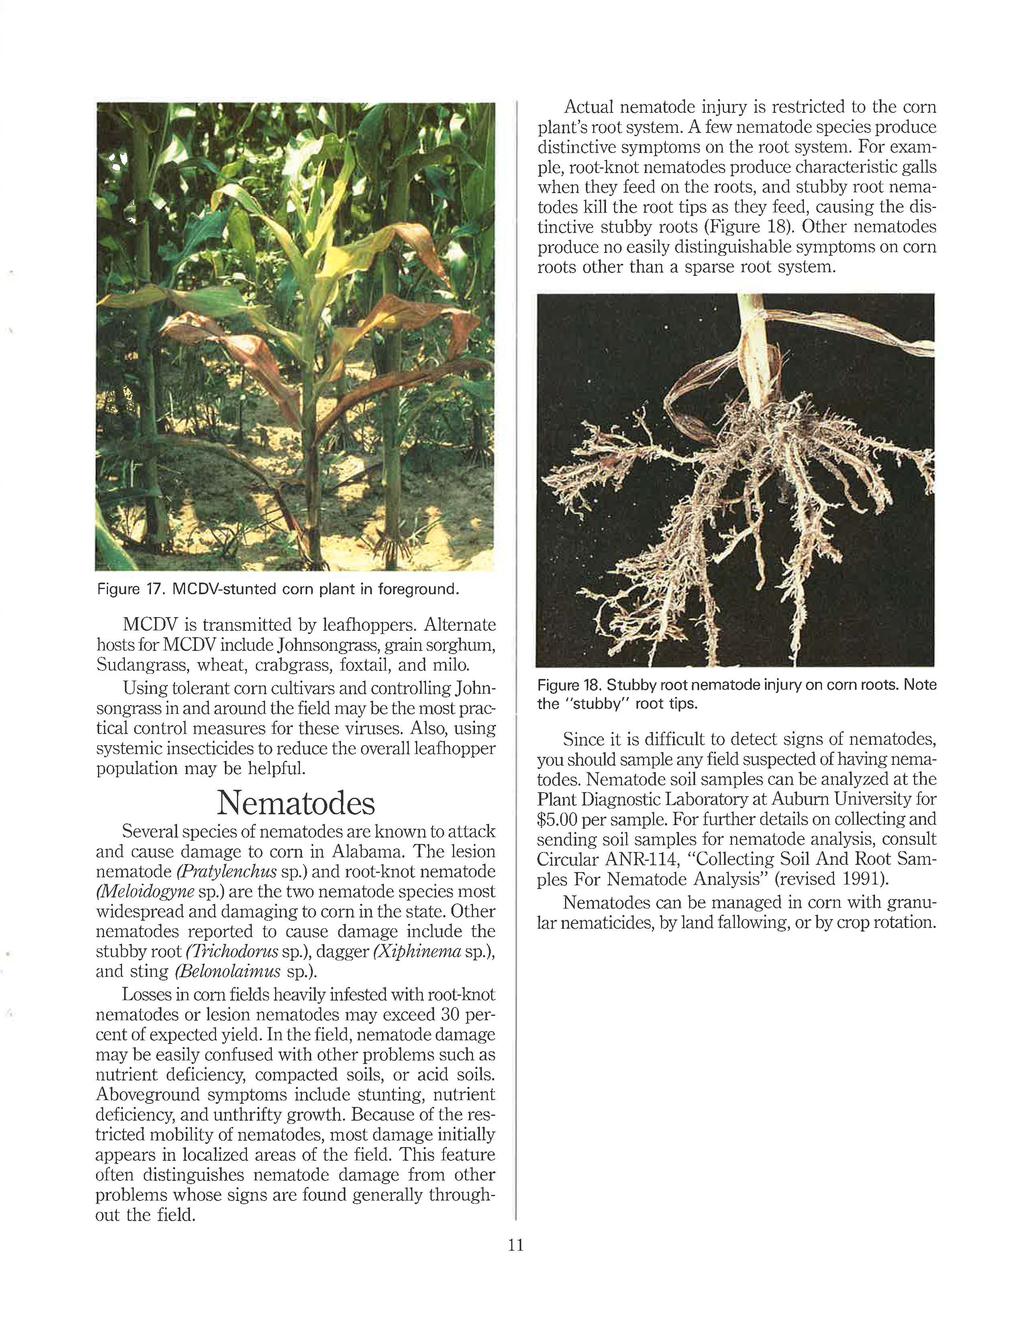 Actual nematode injury is restricted to the com plant's root system. A few nematode species produce distinctive symptoms on the root system.